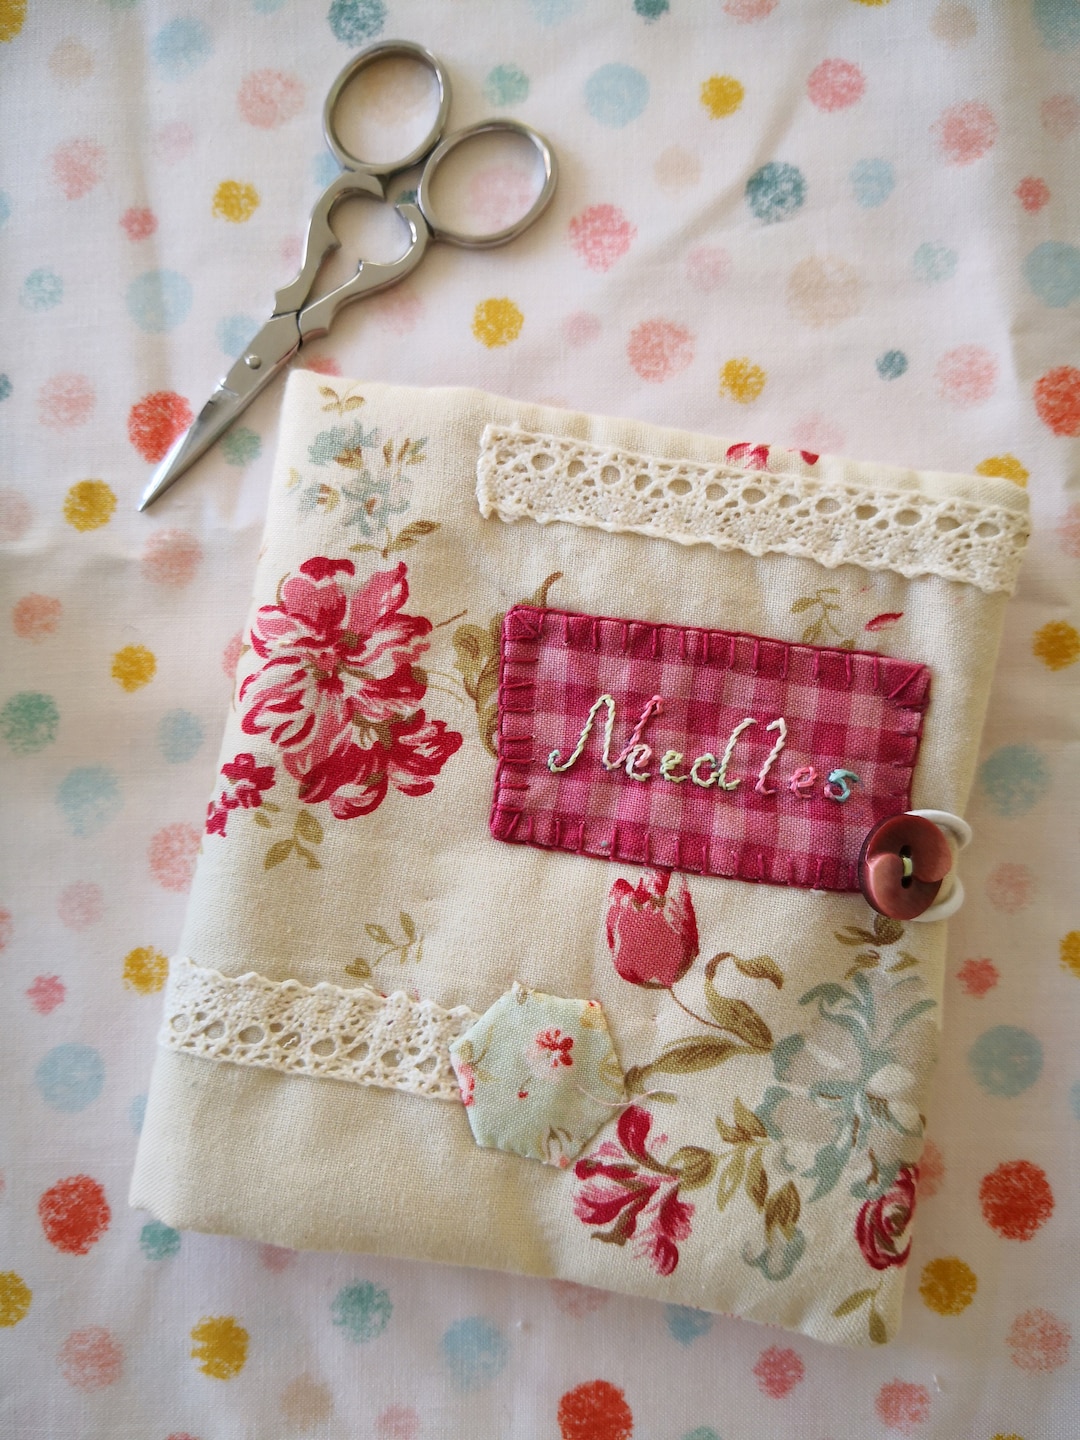 Patchwork Pincushion and Needlebook Project - The Sewing Directory